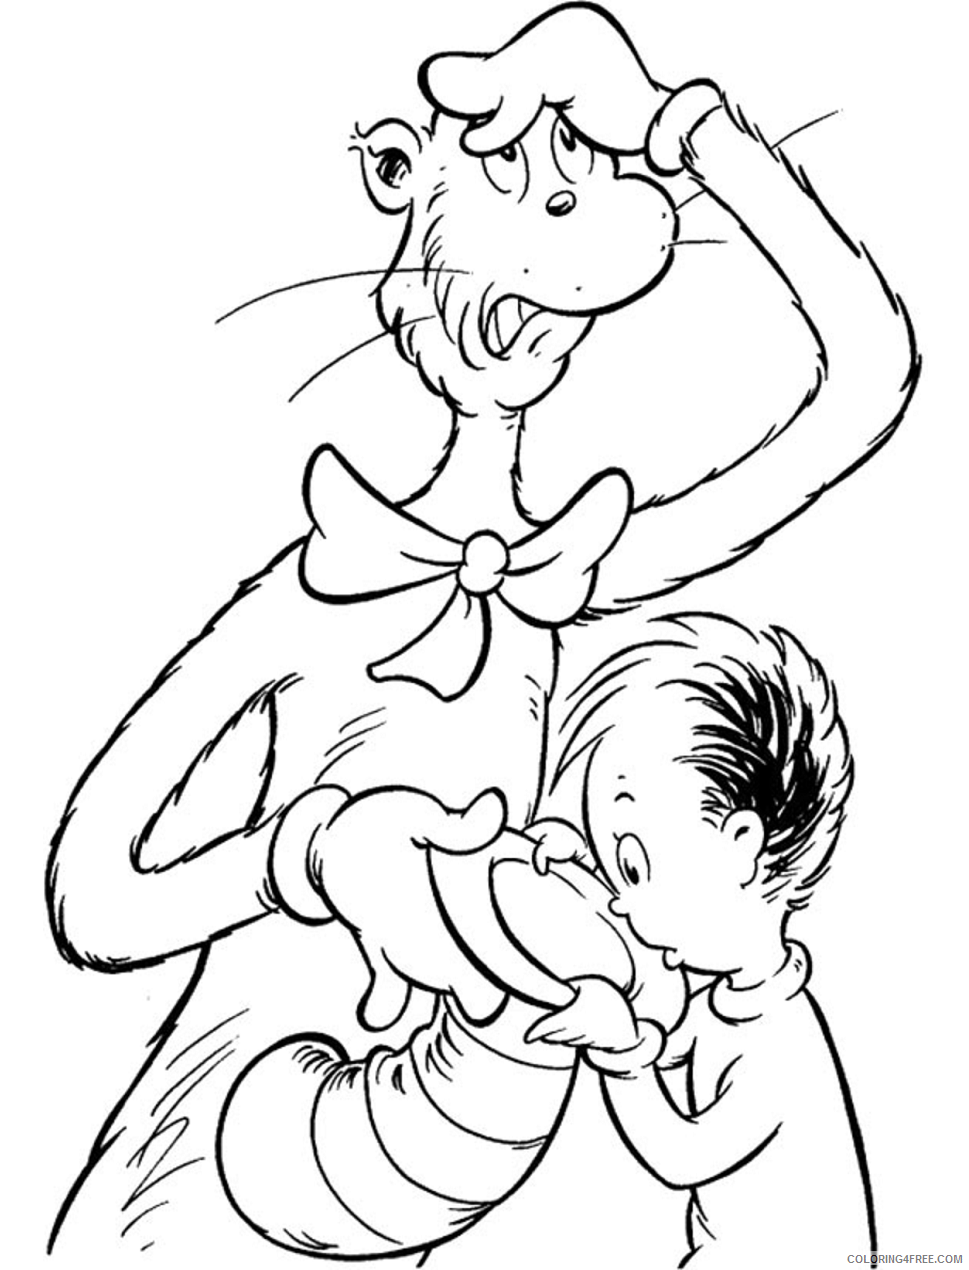 The Cat in the Hat Coloring Pages Cartoons 1567670609_cat_showing_hat a4 Printable 2020 6370 Coloring4free